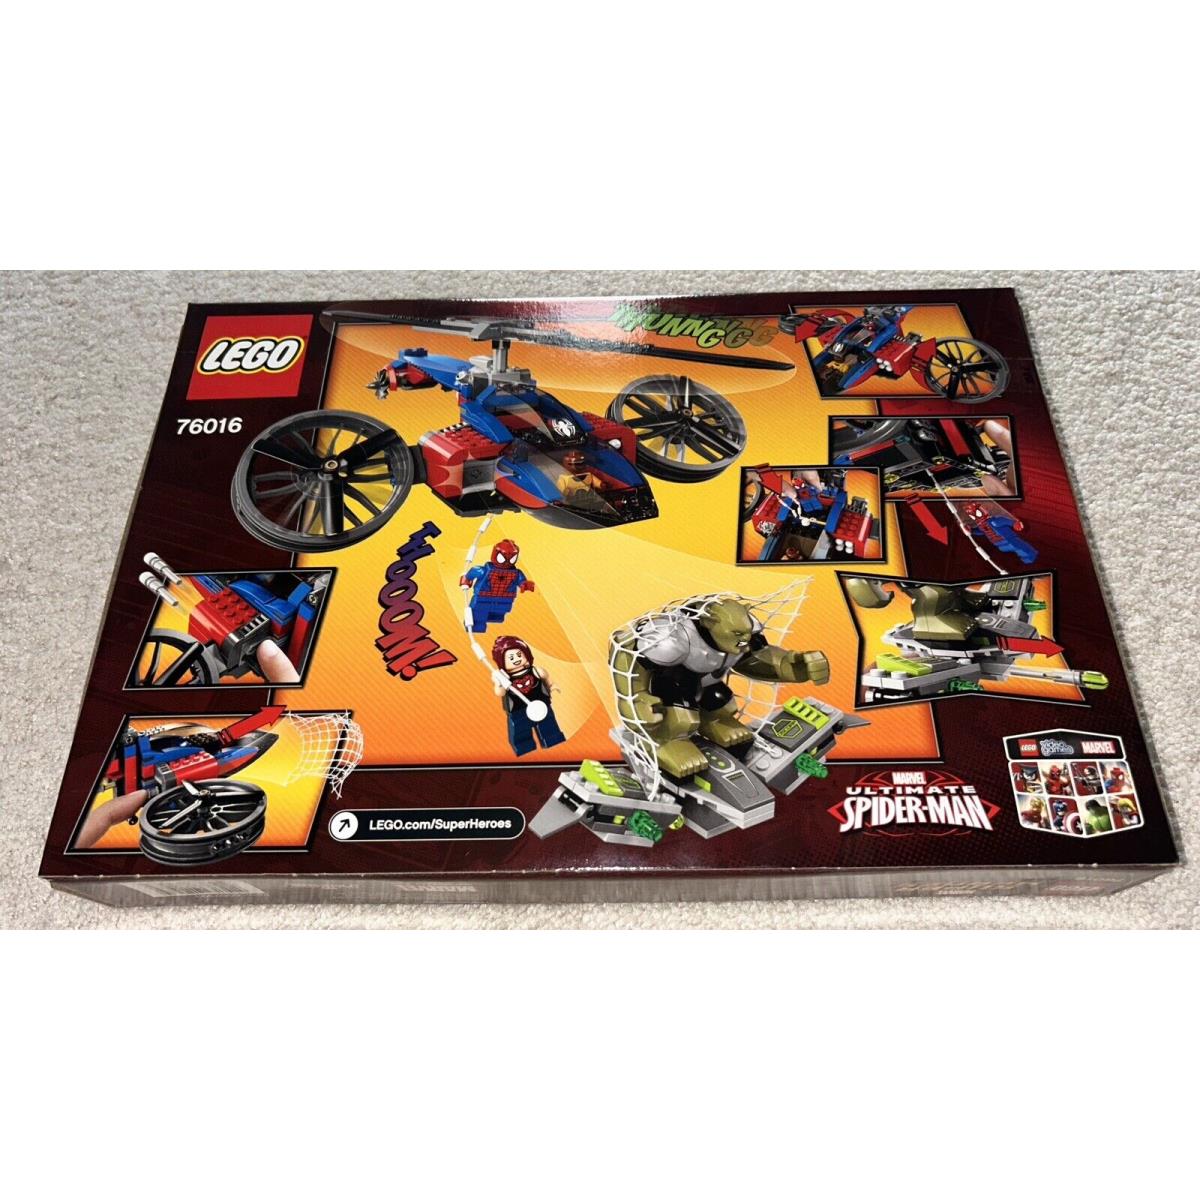 Marvel Super Heroes Lego - 76016 Spider-helicopter Rescue